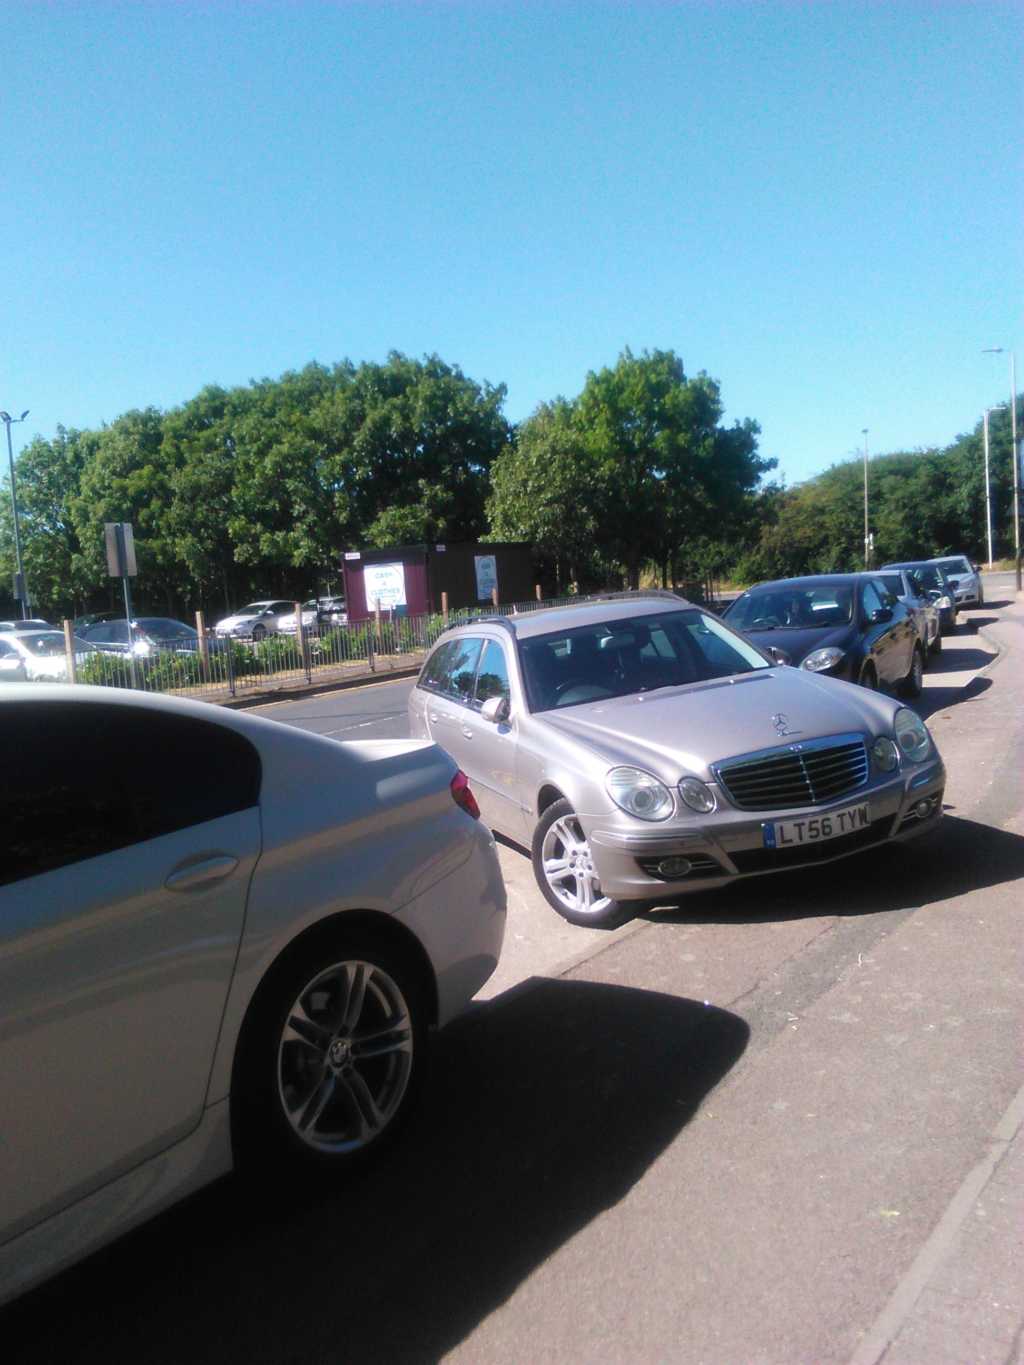 LT56TYW displaying Inconsiderate Parking